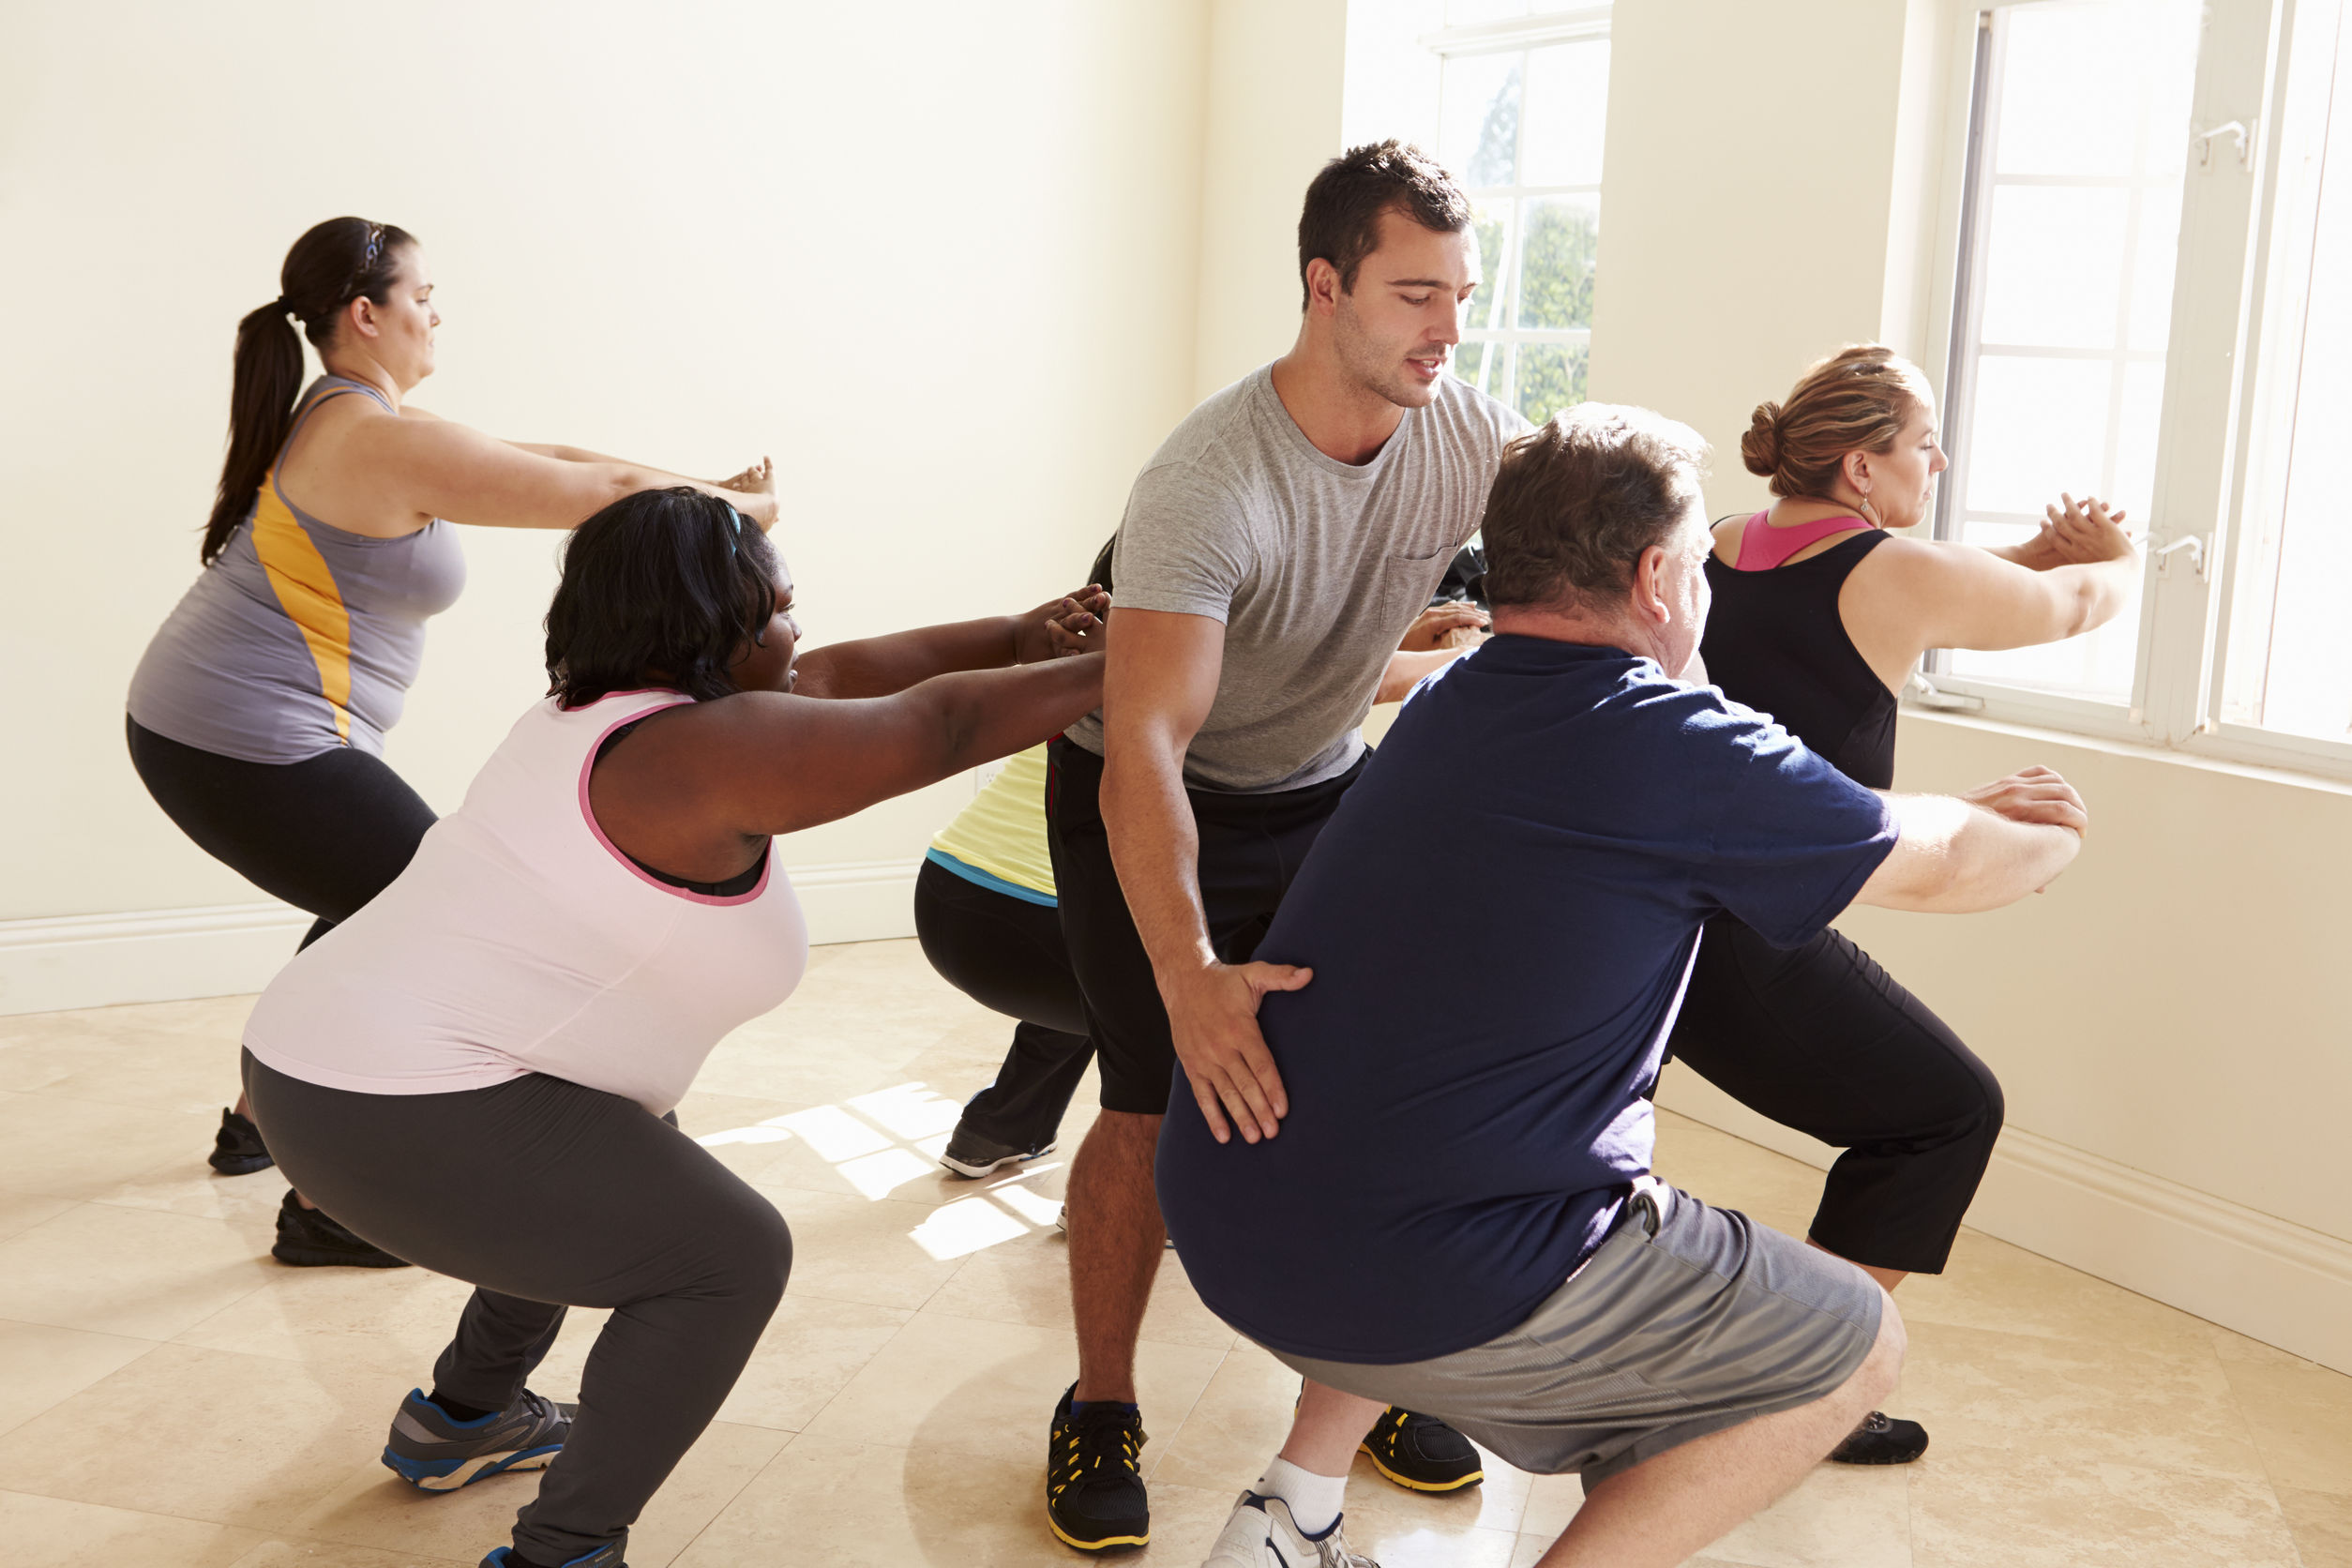 Exercise group class. https://www.info-on-high-blood-pressure.com/fitness-goals.html